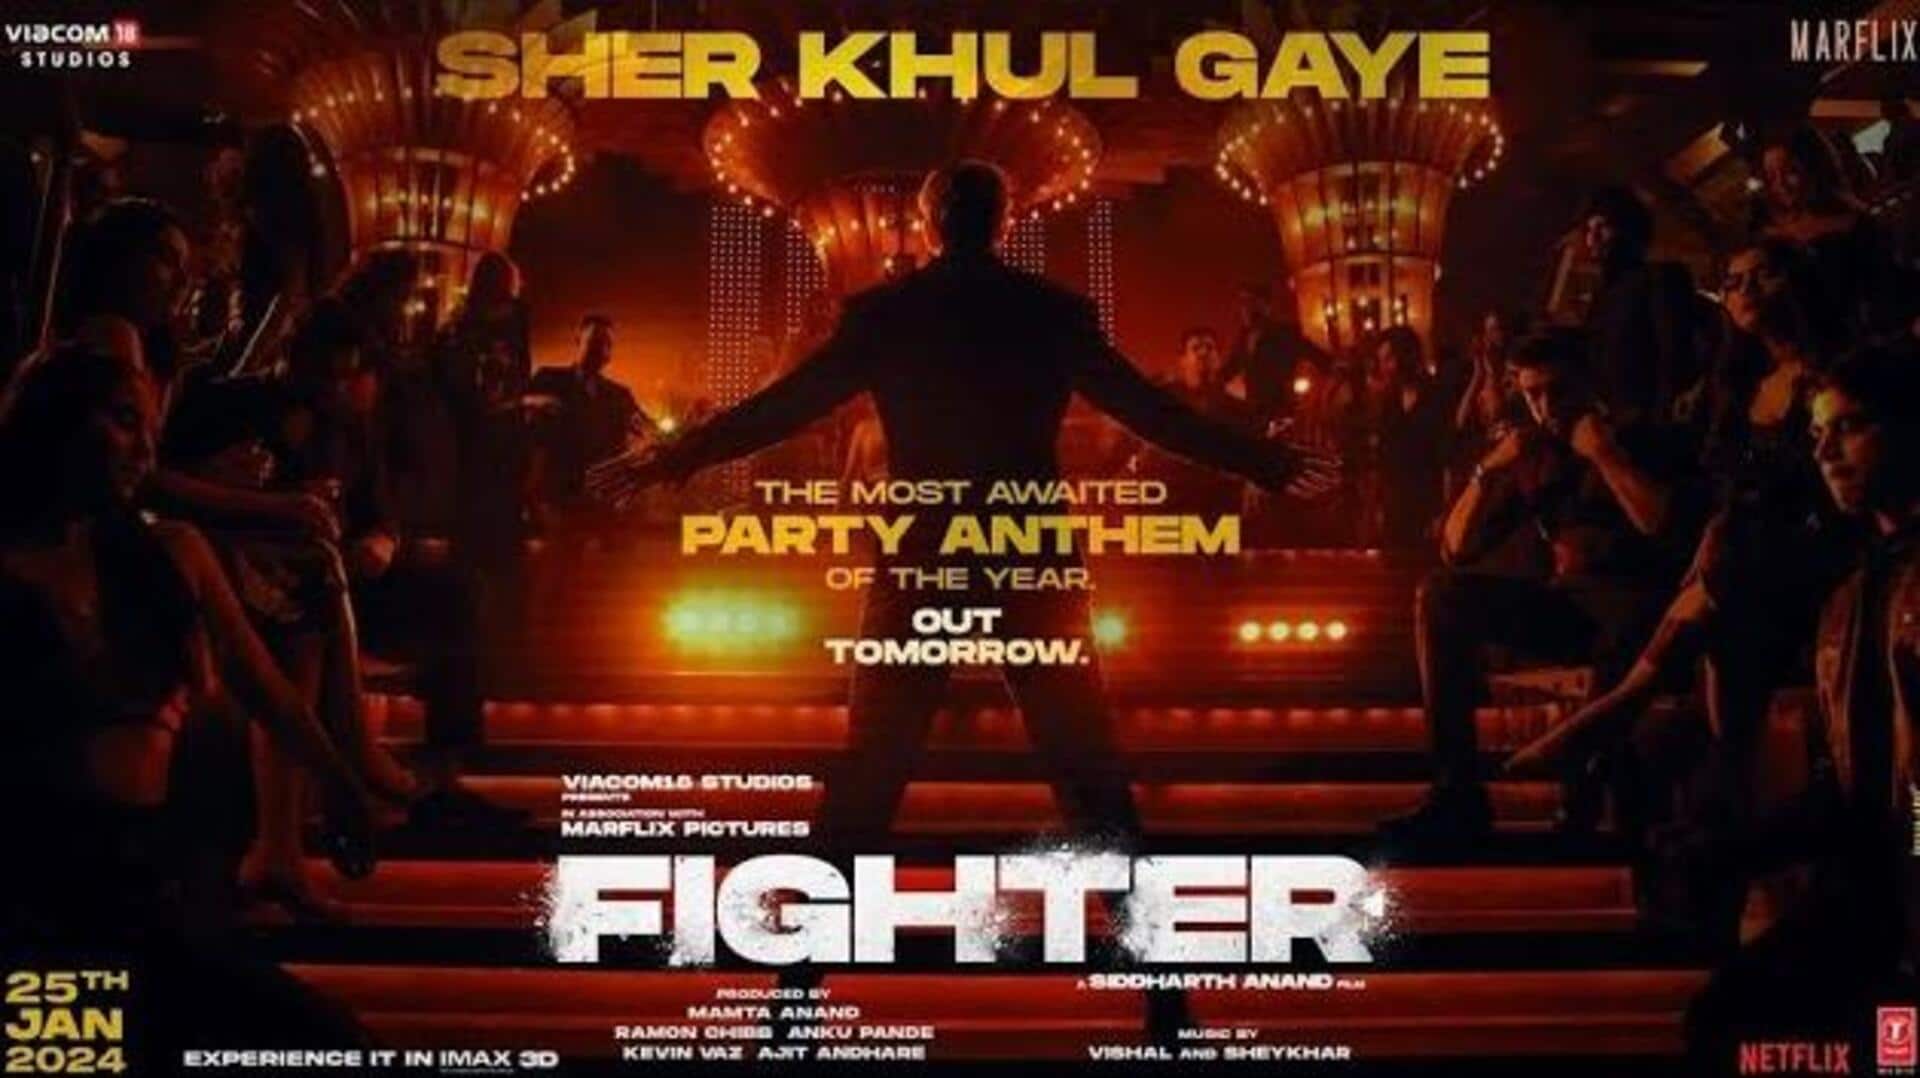 'Fighter's 'Sher Khul Gaye': Hrithik-Deepika set the stage on fire